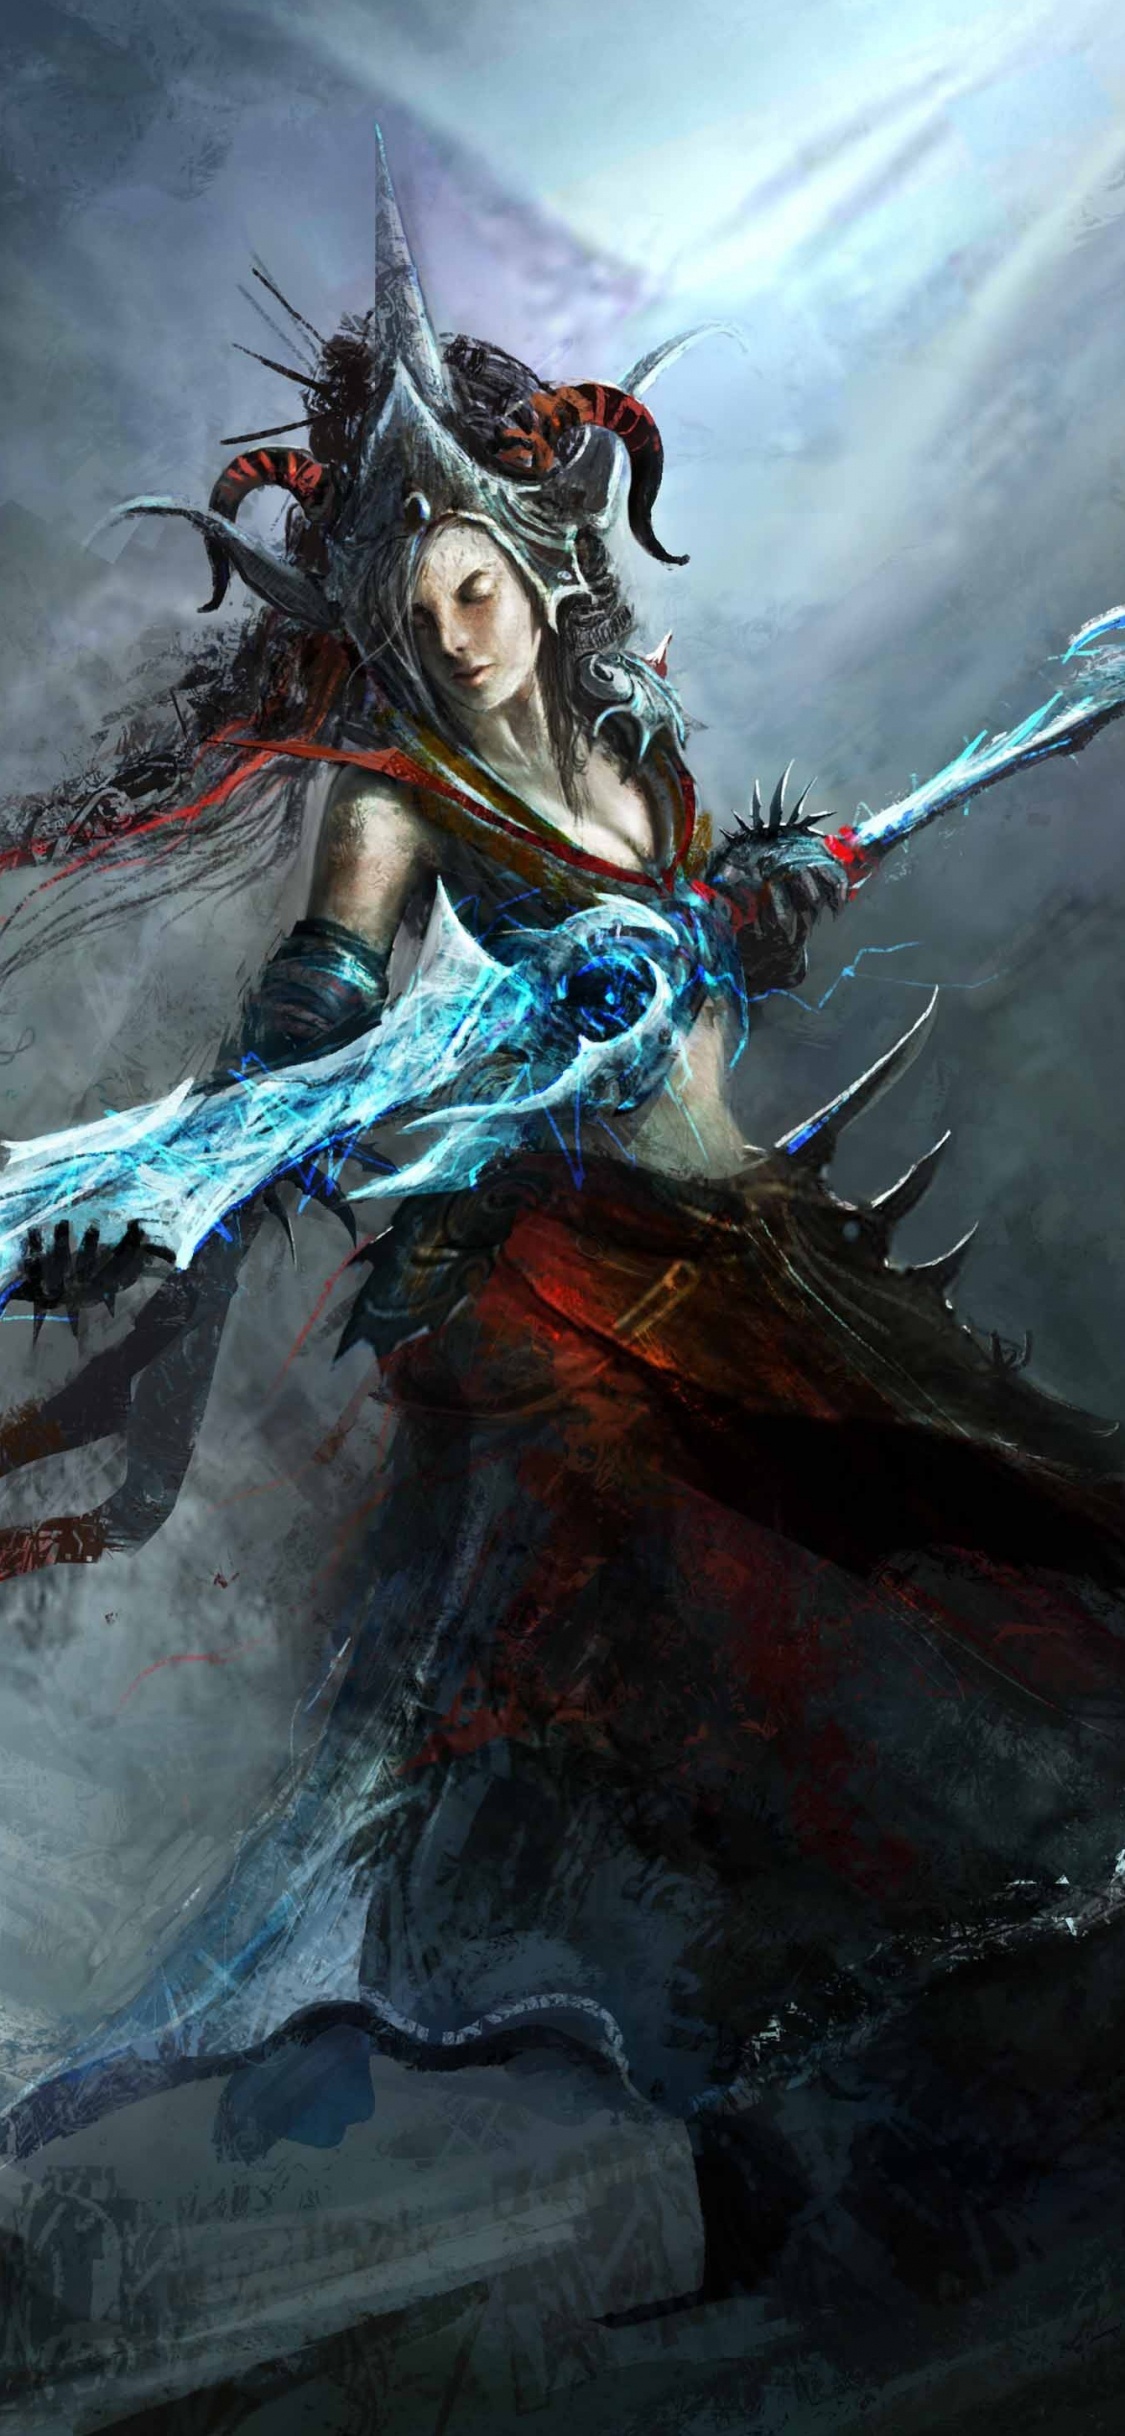 Woman in Blue Dress Holding a Sword Illustration. Wallpaper in 1125x2436 Resolution